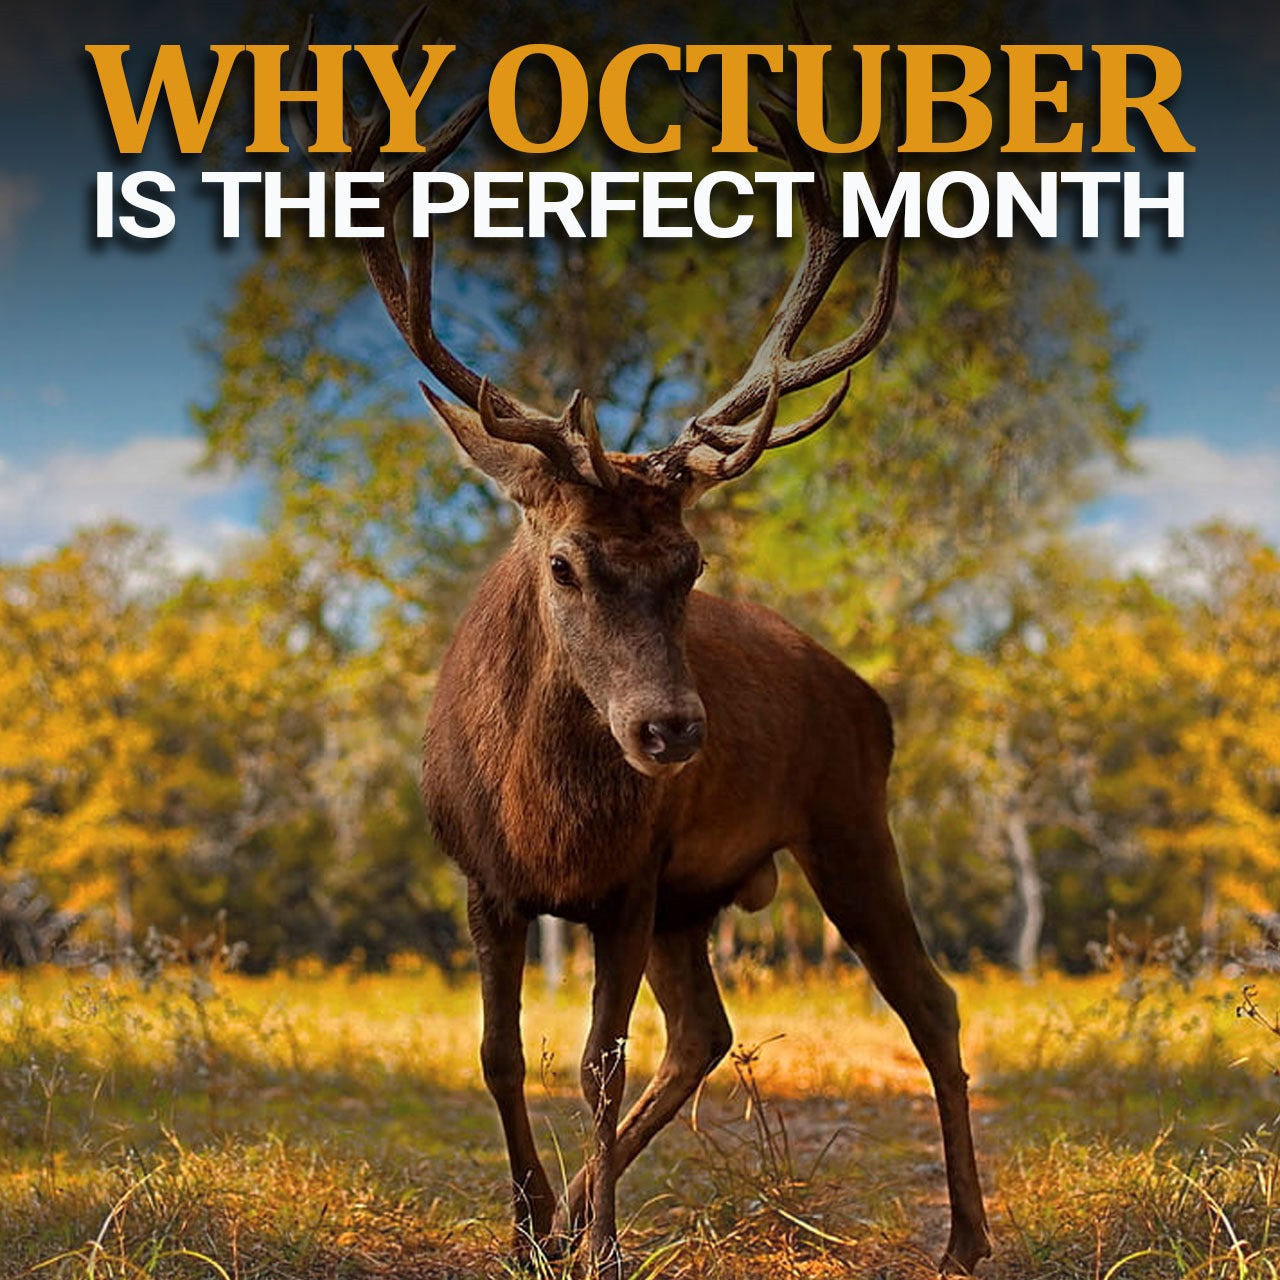 Why October Is The Perfect Month?